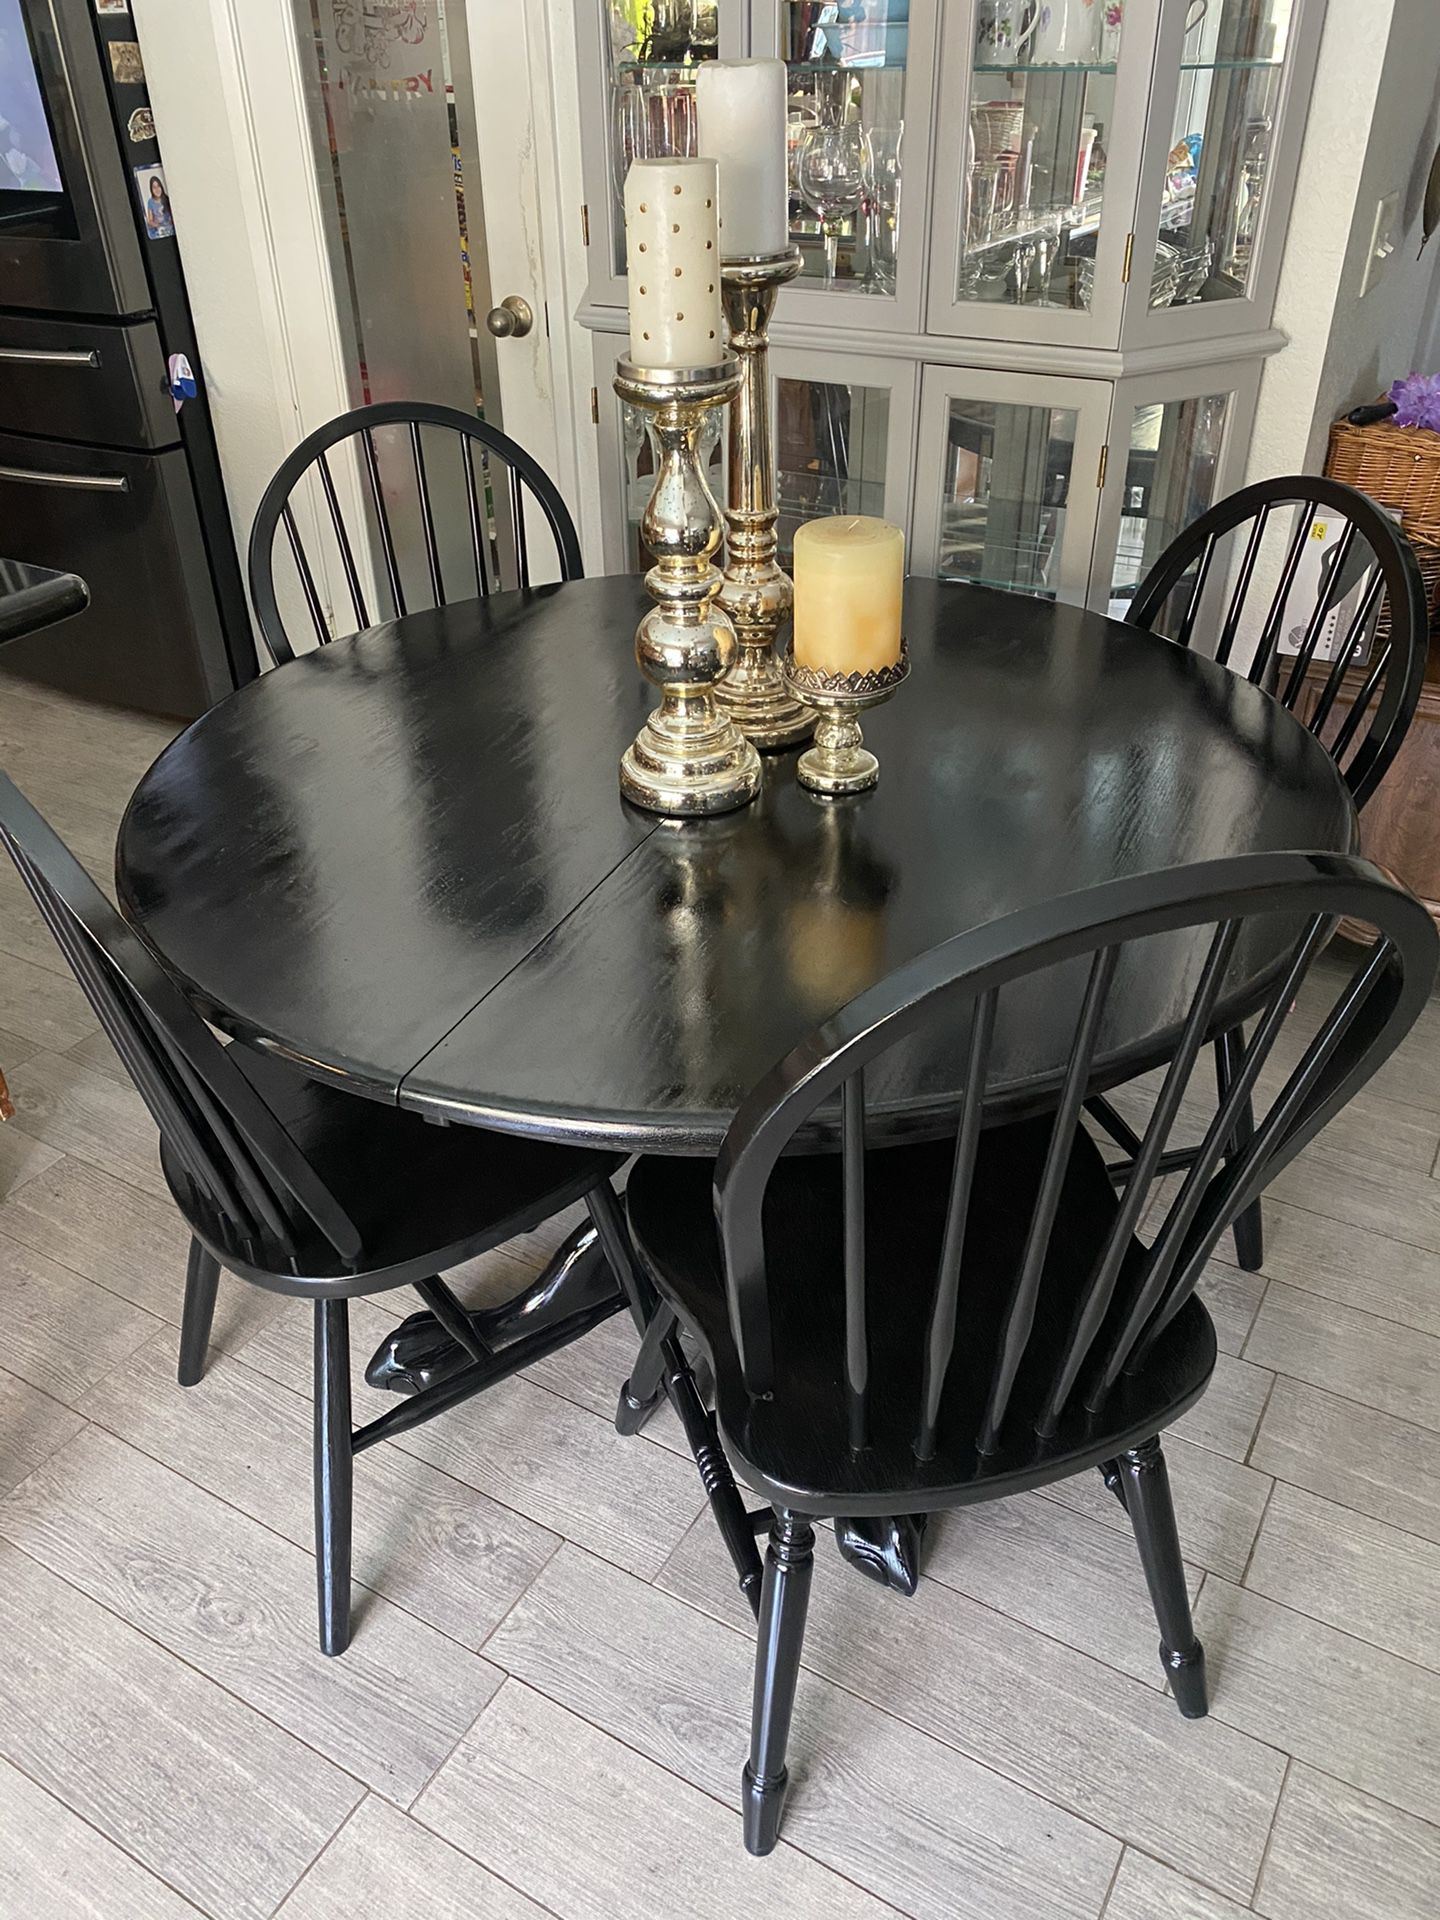 Beautiful dining table with chairs